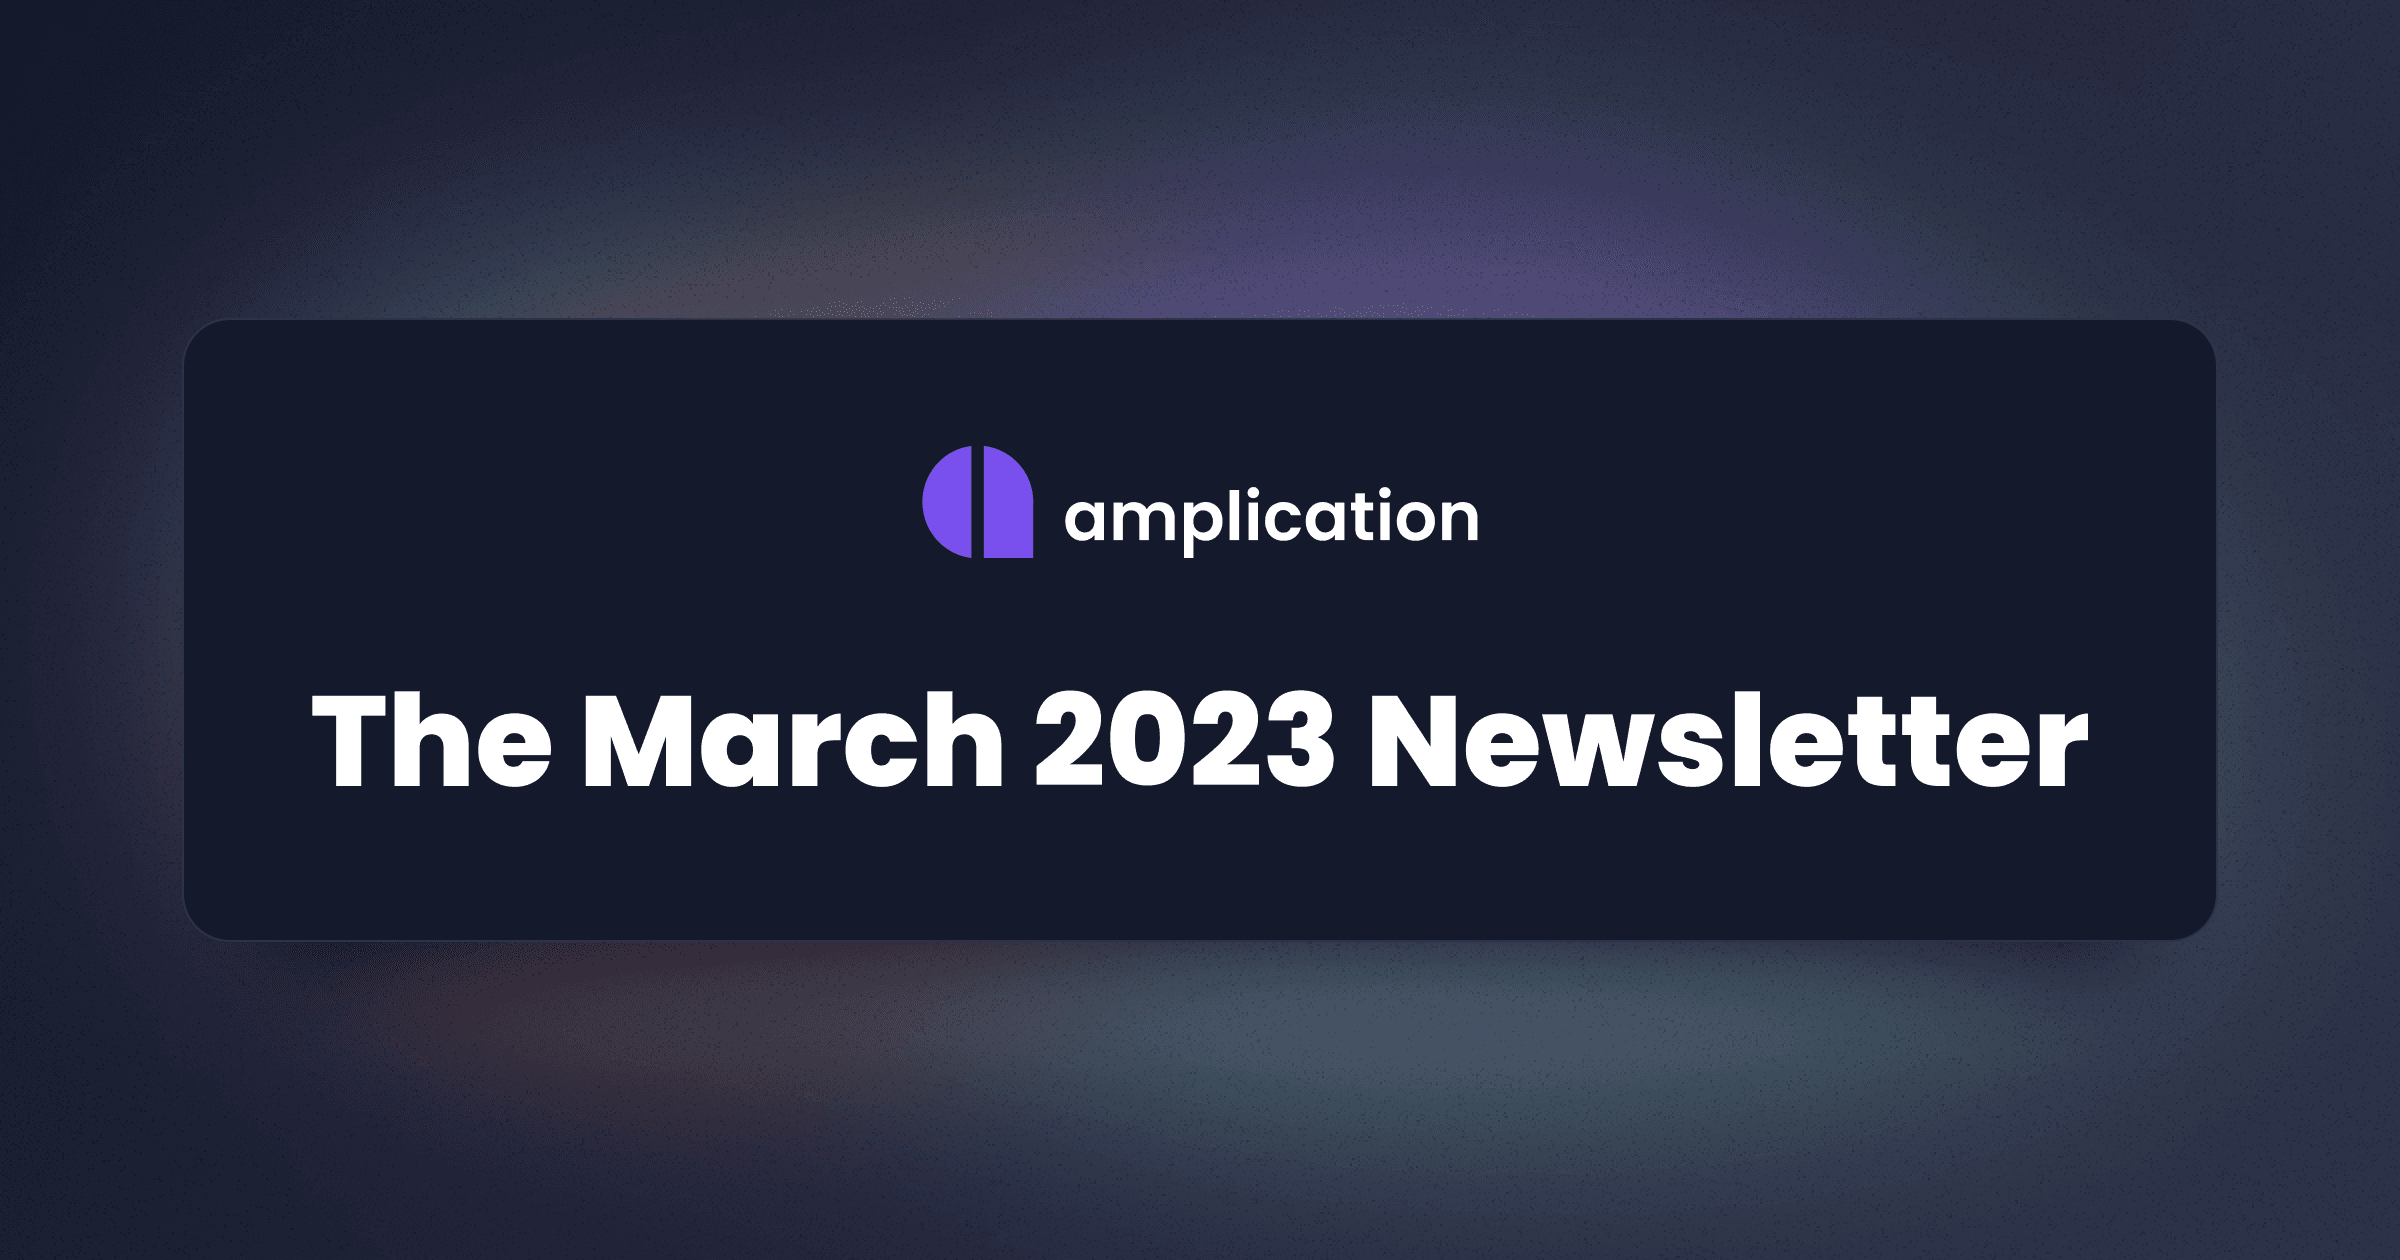 The March 2023 Newsletter